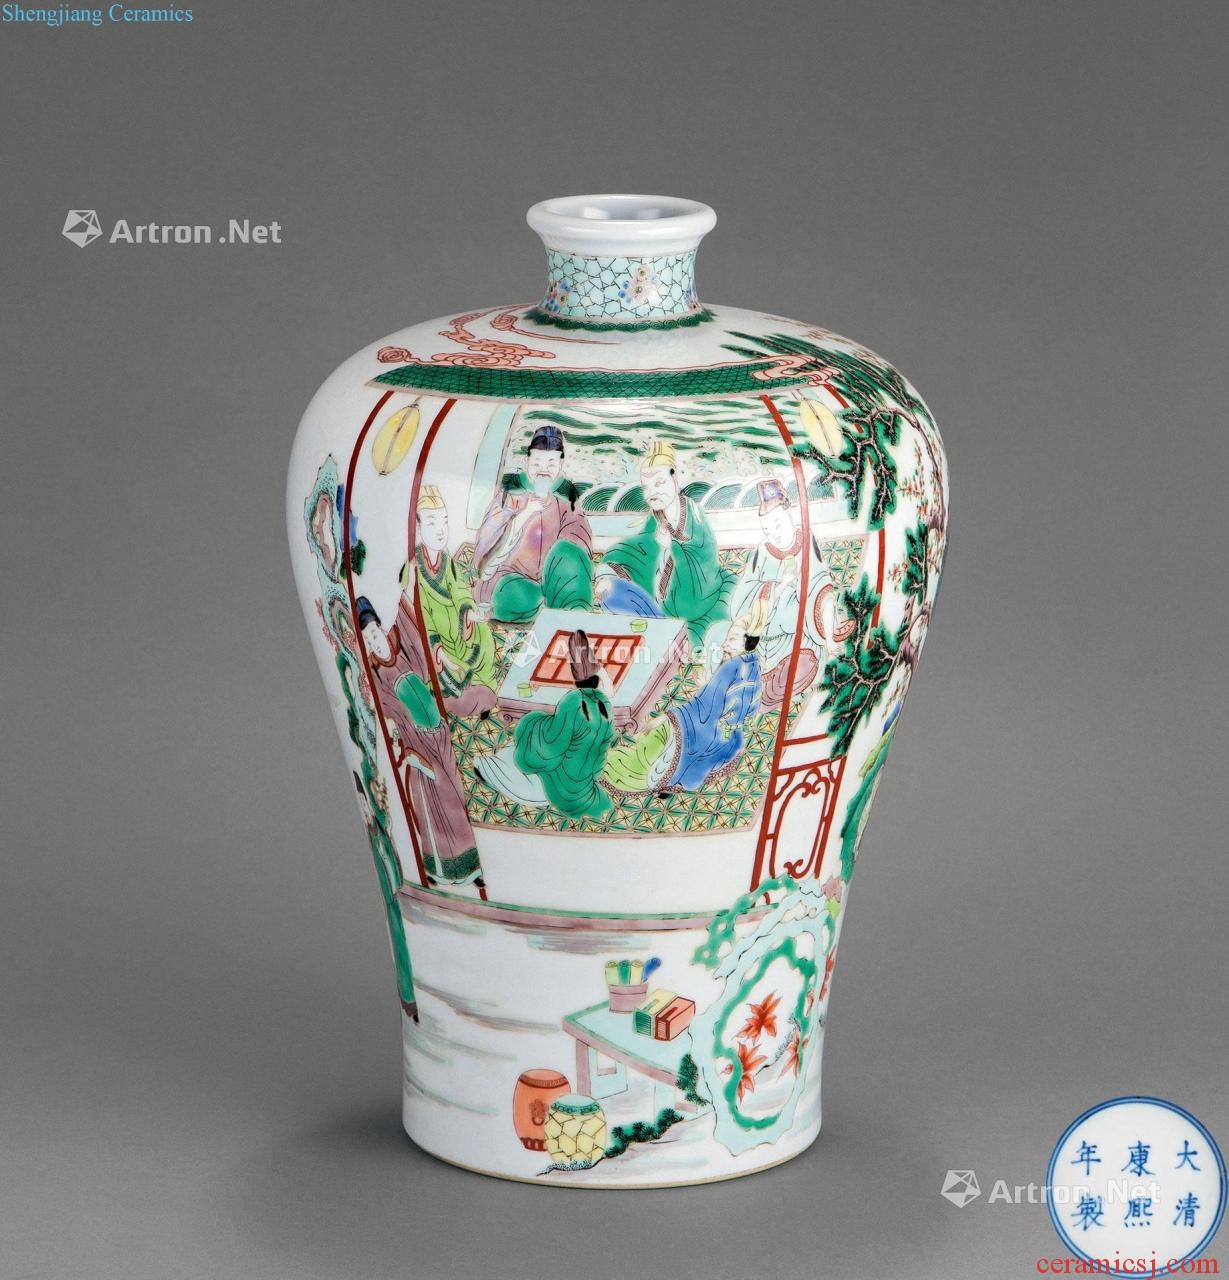 Colorful characters story lines in the qing dynasty plum bottle